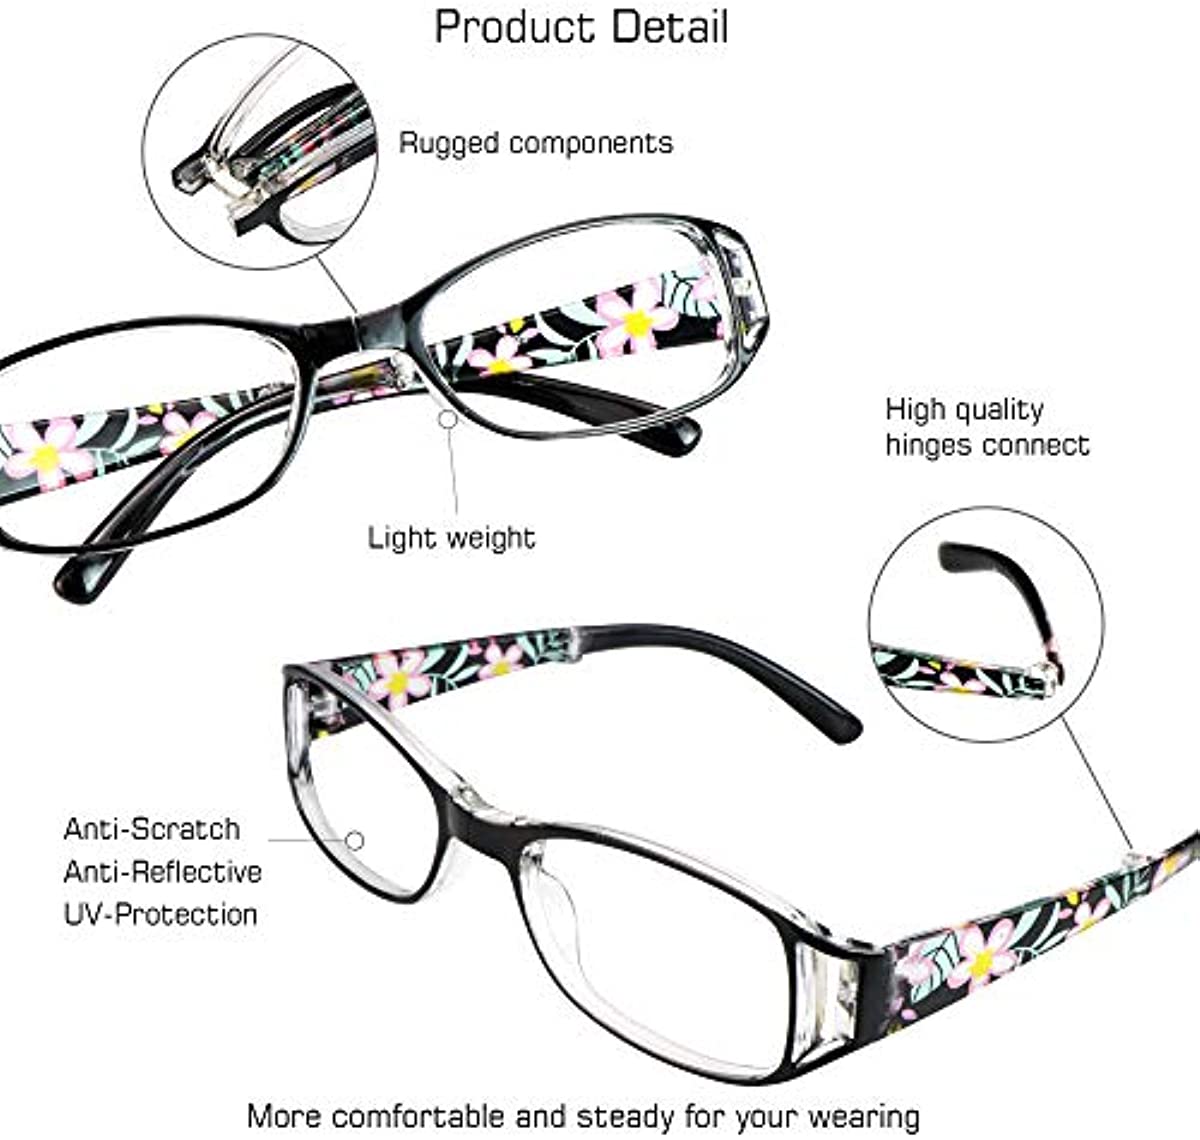 3 Pair Reading Glasses Foldable Readers with Blue Light Blocking lens Compact Folding Glasses for Women Reading Case Included (Black, +2.50 Magnification)